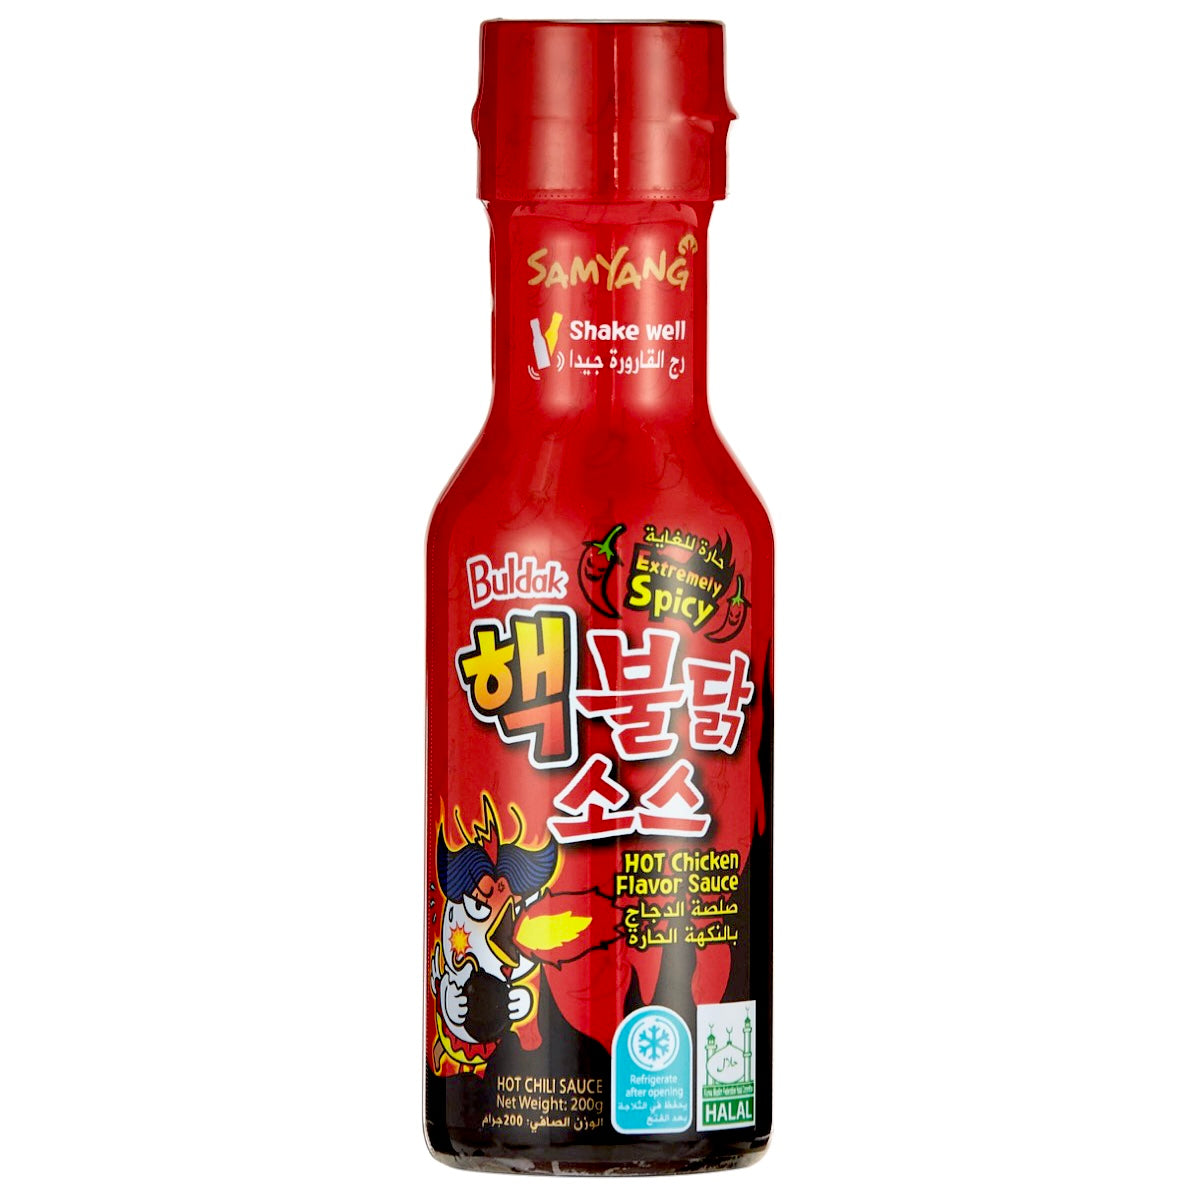 Samyang Extreme Buldak Hot Chicken Flavour Sauce (Extremely Spicy) 200g